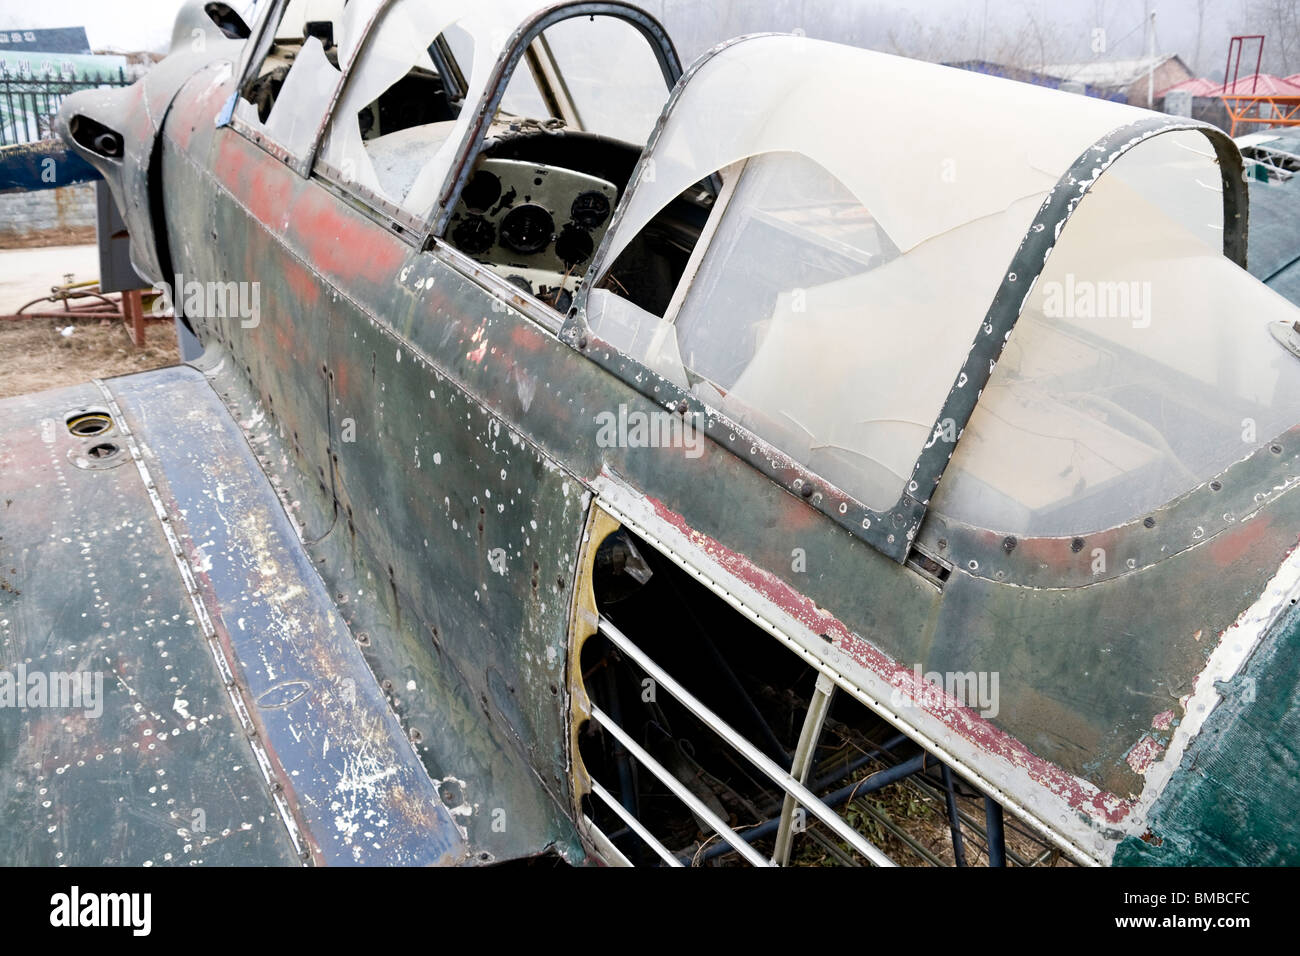 abandoned decommissioned vintage airplane in a field Stock Photo